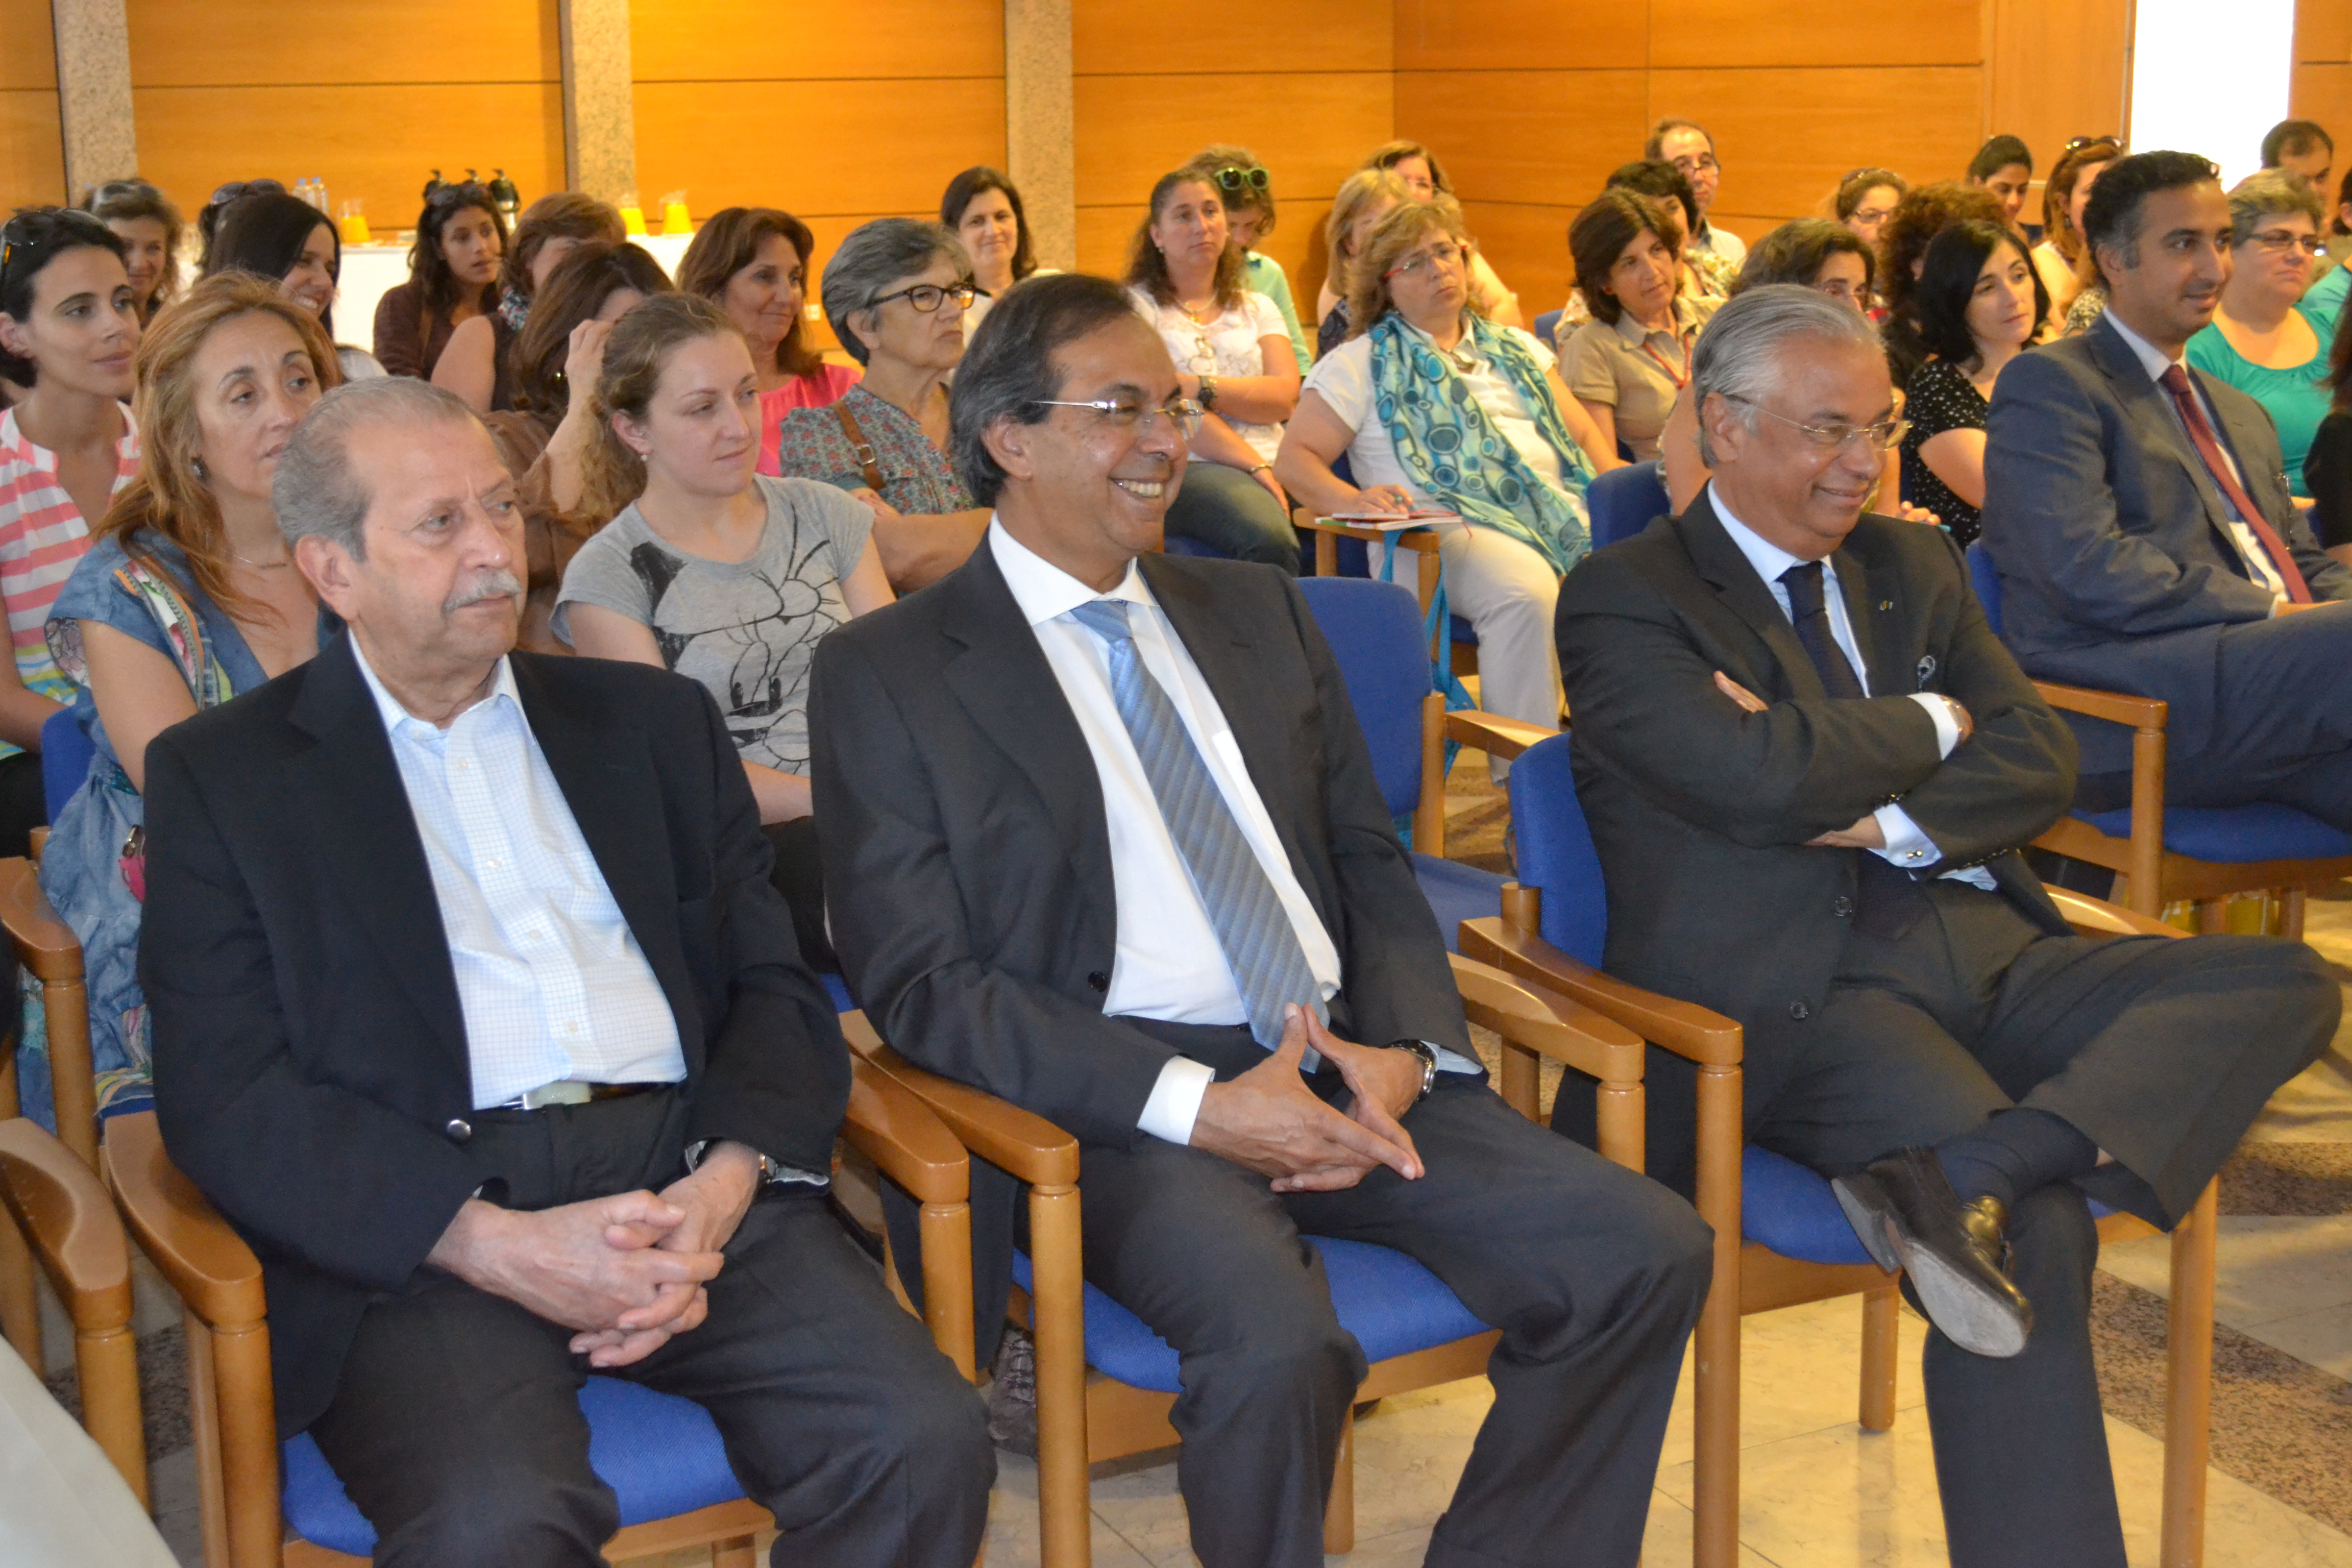 Aga Khan Foundation book launch at the Ismaili Centre, Lisbon. Courtesy of the Ismaili Council for Portugal